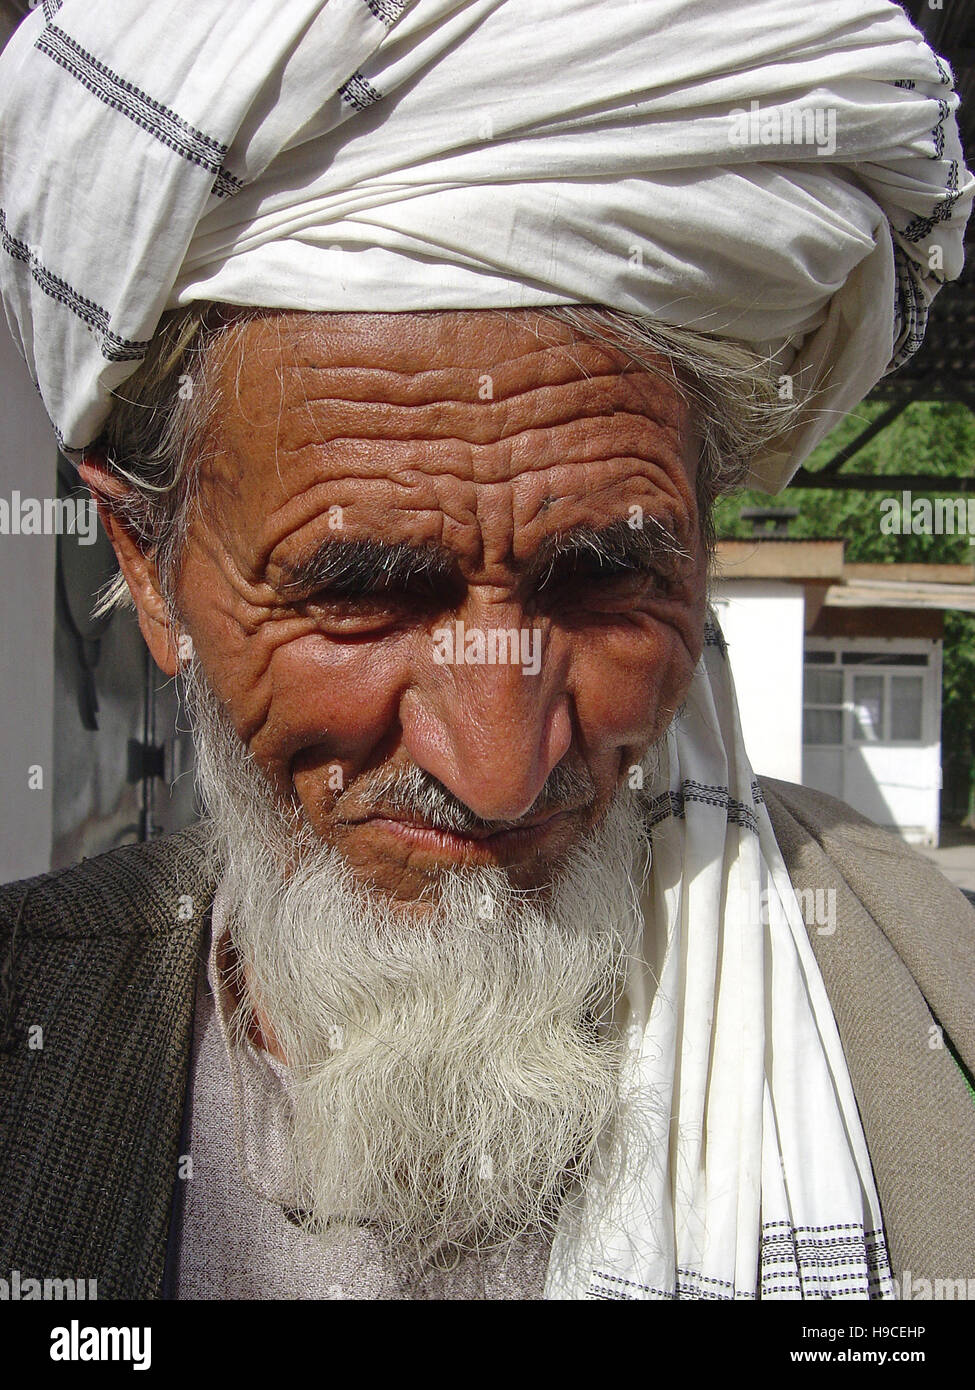 31st May 2004 Portrait of an old tribesman wearing a lungee (turban) inside the Wazir Akbar Khan Orthopaedic Centre in northern Kabul, Afghanistan. Stock Photo